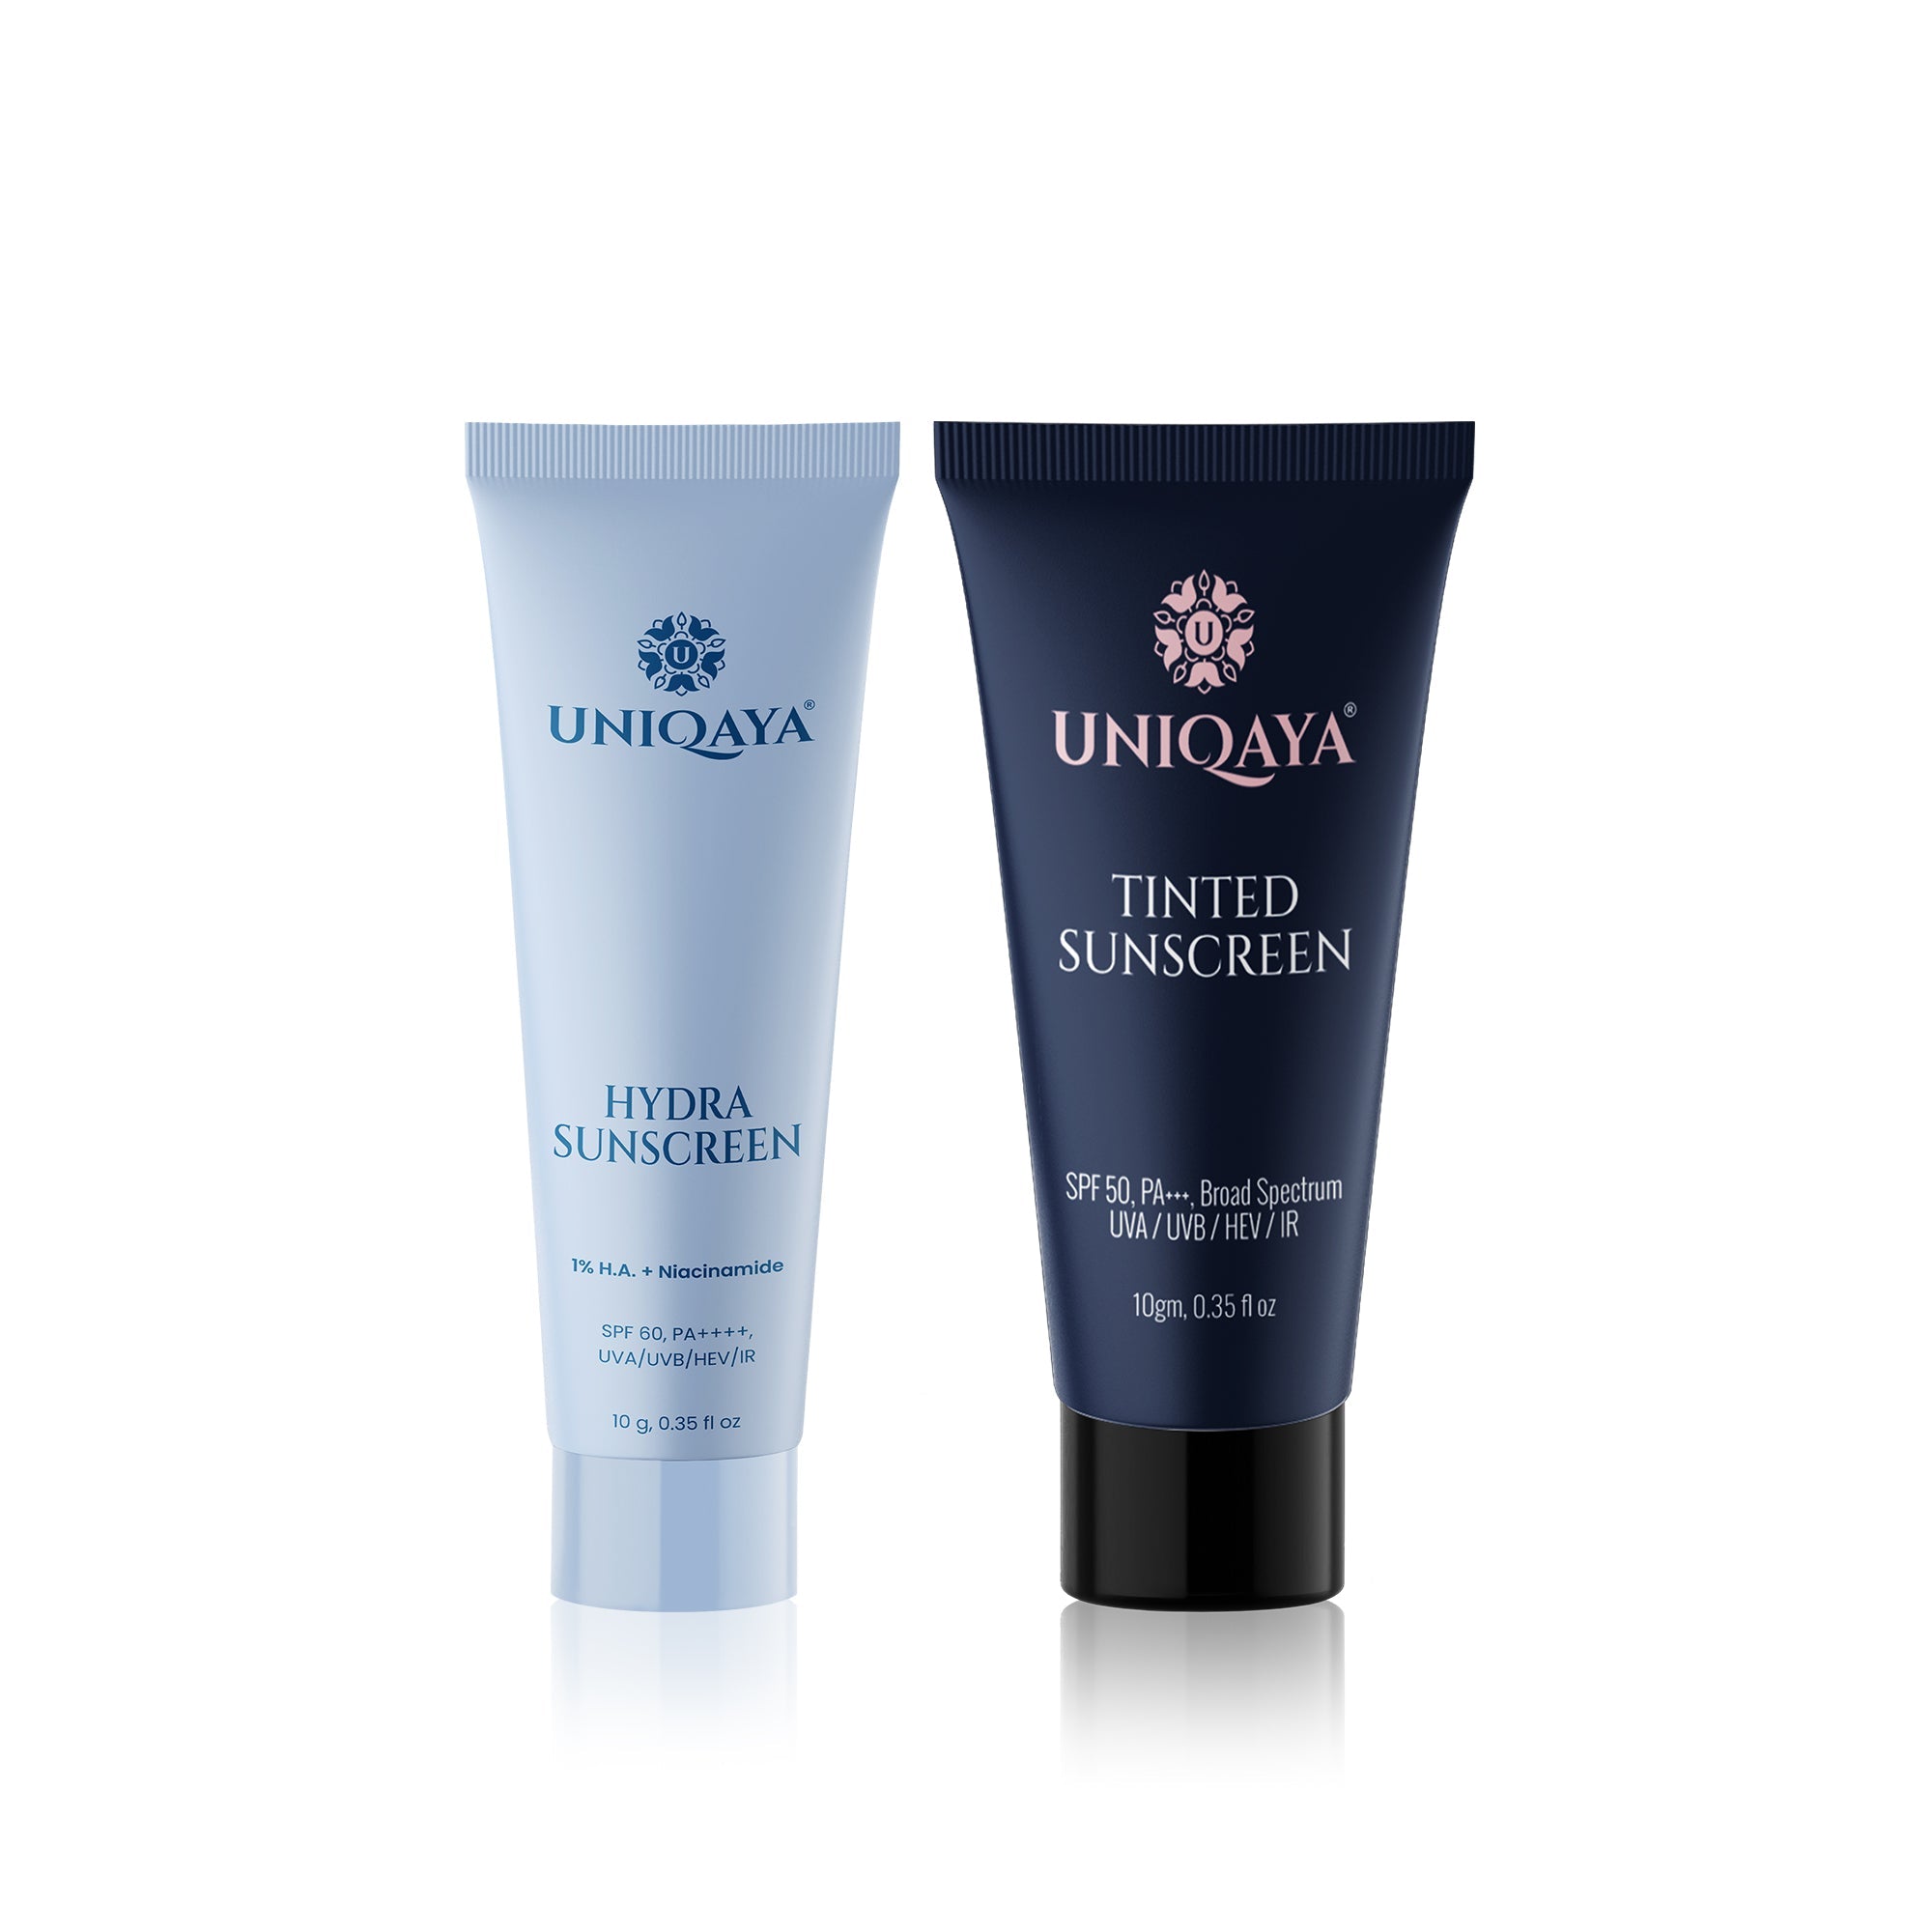 Uniqaya Hydra Sunscreen and Tinted Sunscreen Trial Pack